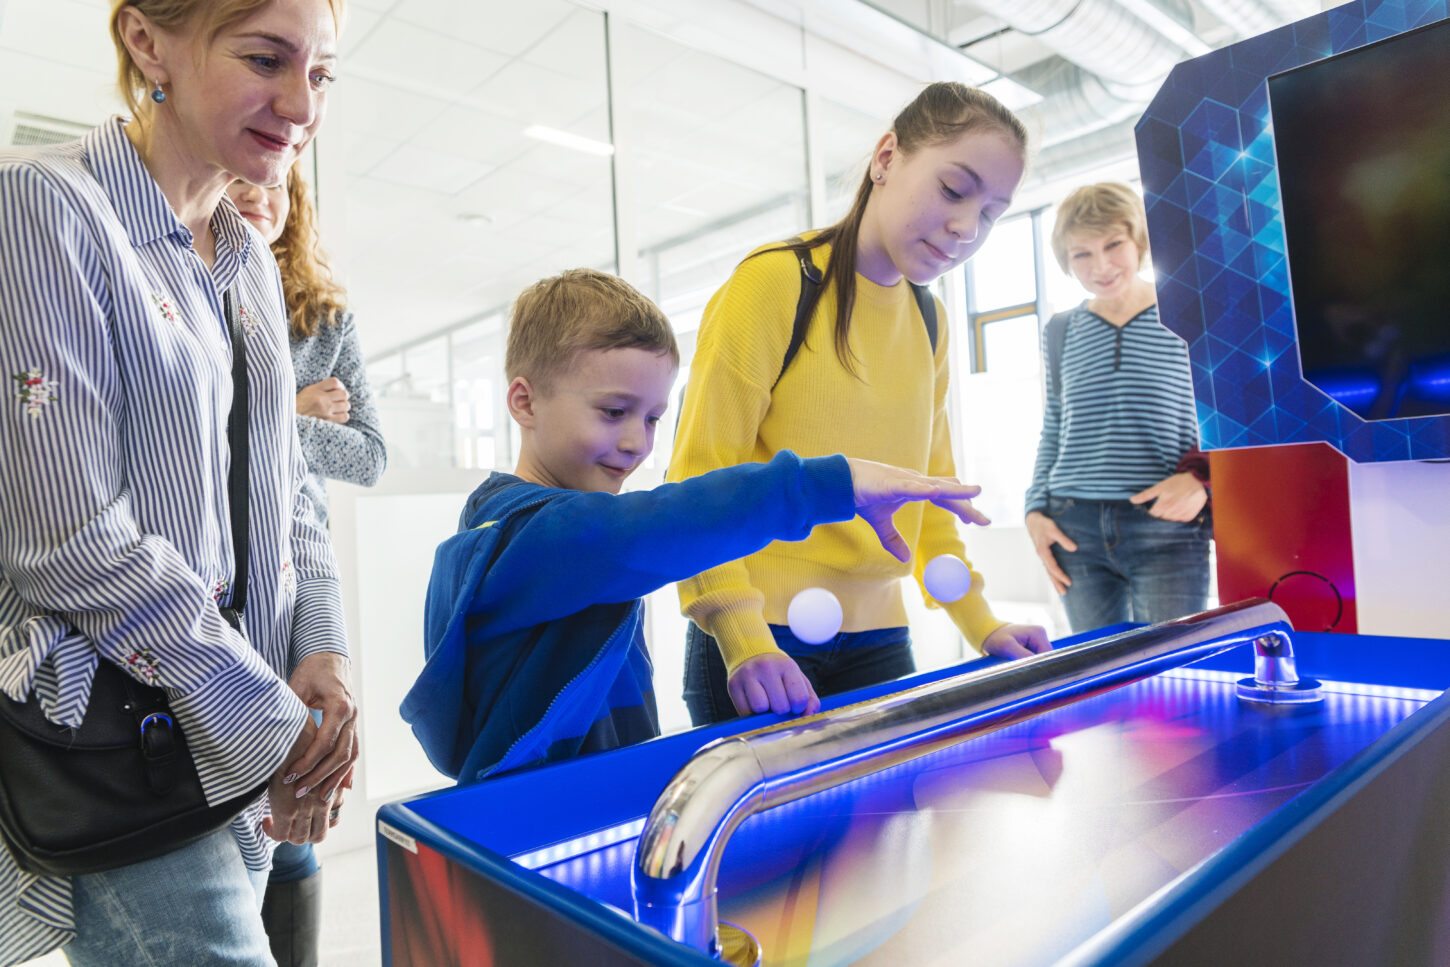 A boy is dropping a ball into an arcade machine while family members look on in a brightly lit indoor hall.